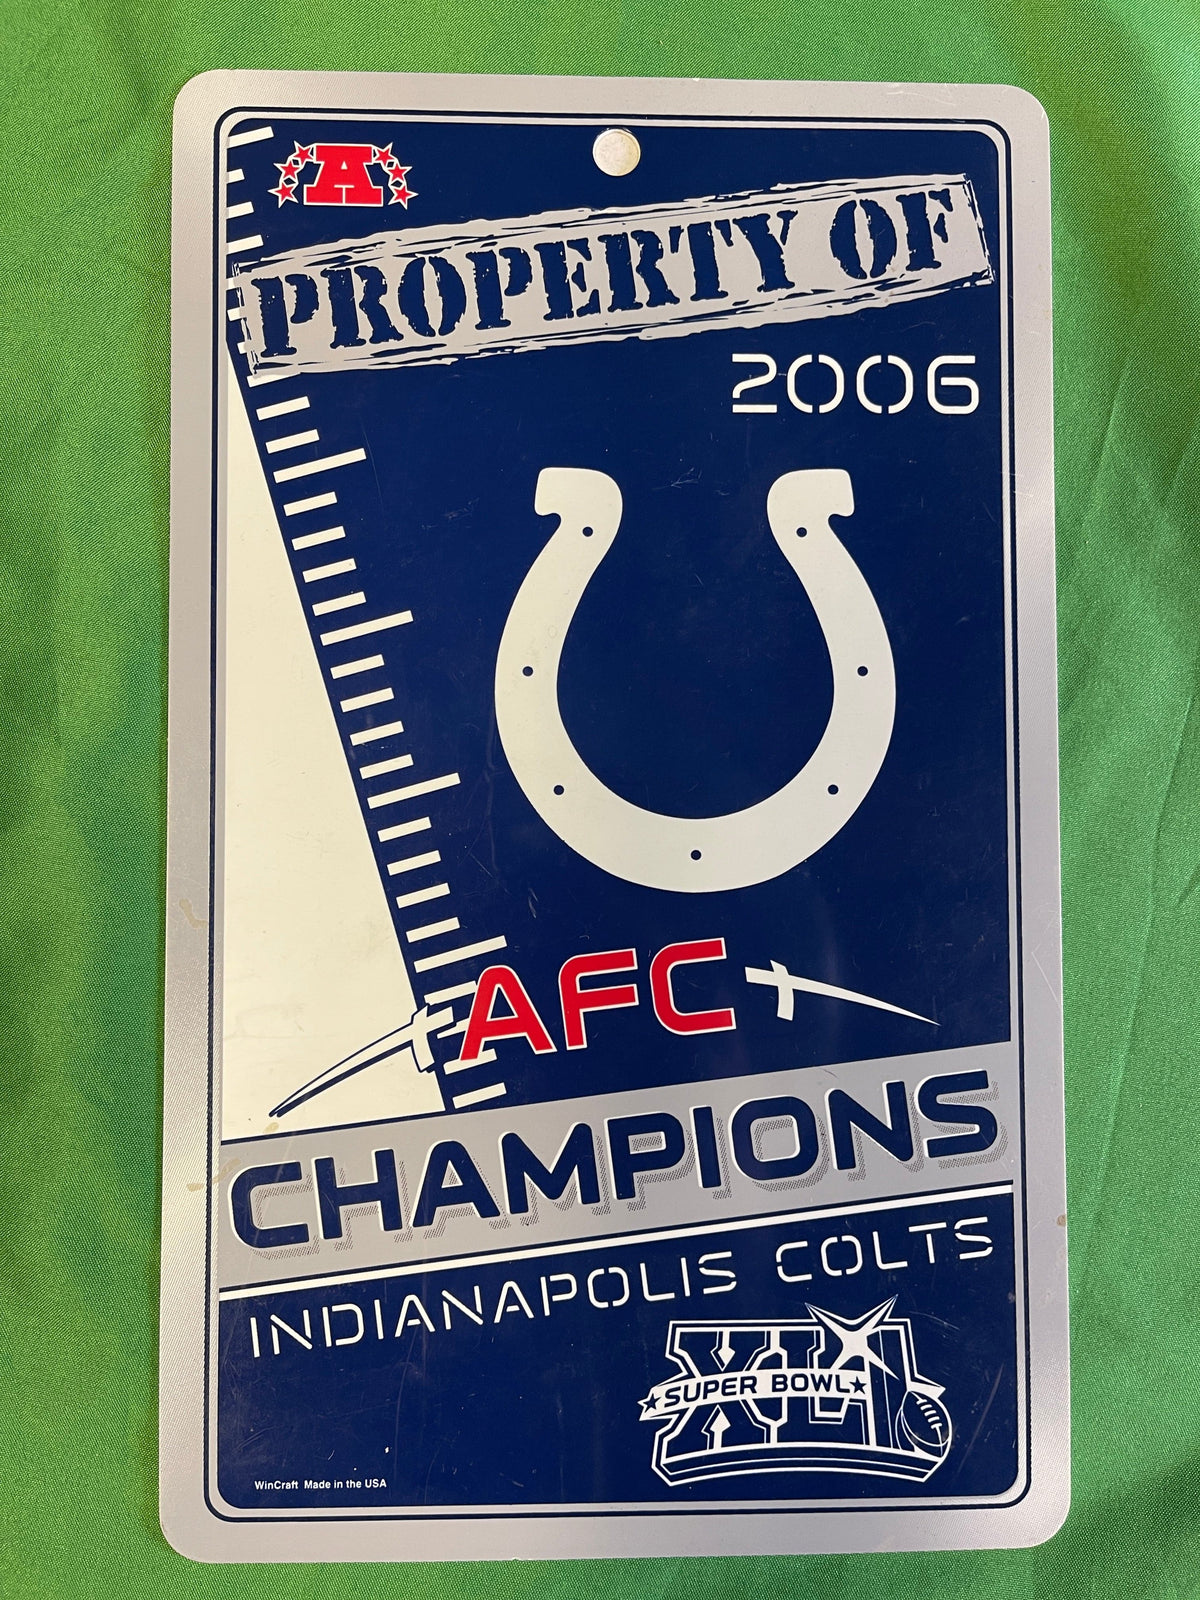 NFL Indianapolis Colts "Property of AFC Champions" Plastic Sign